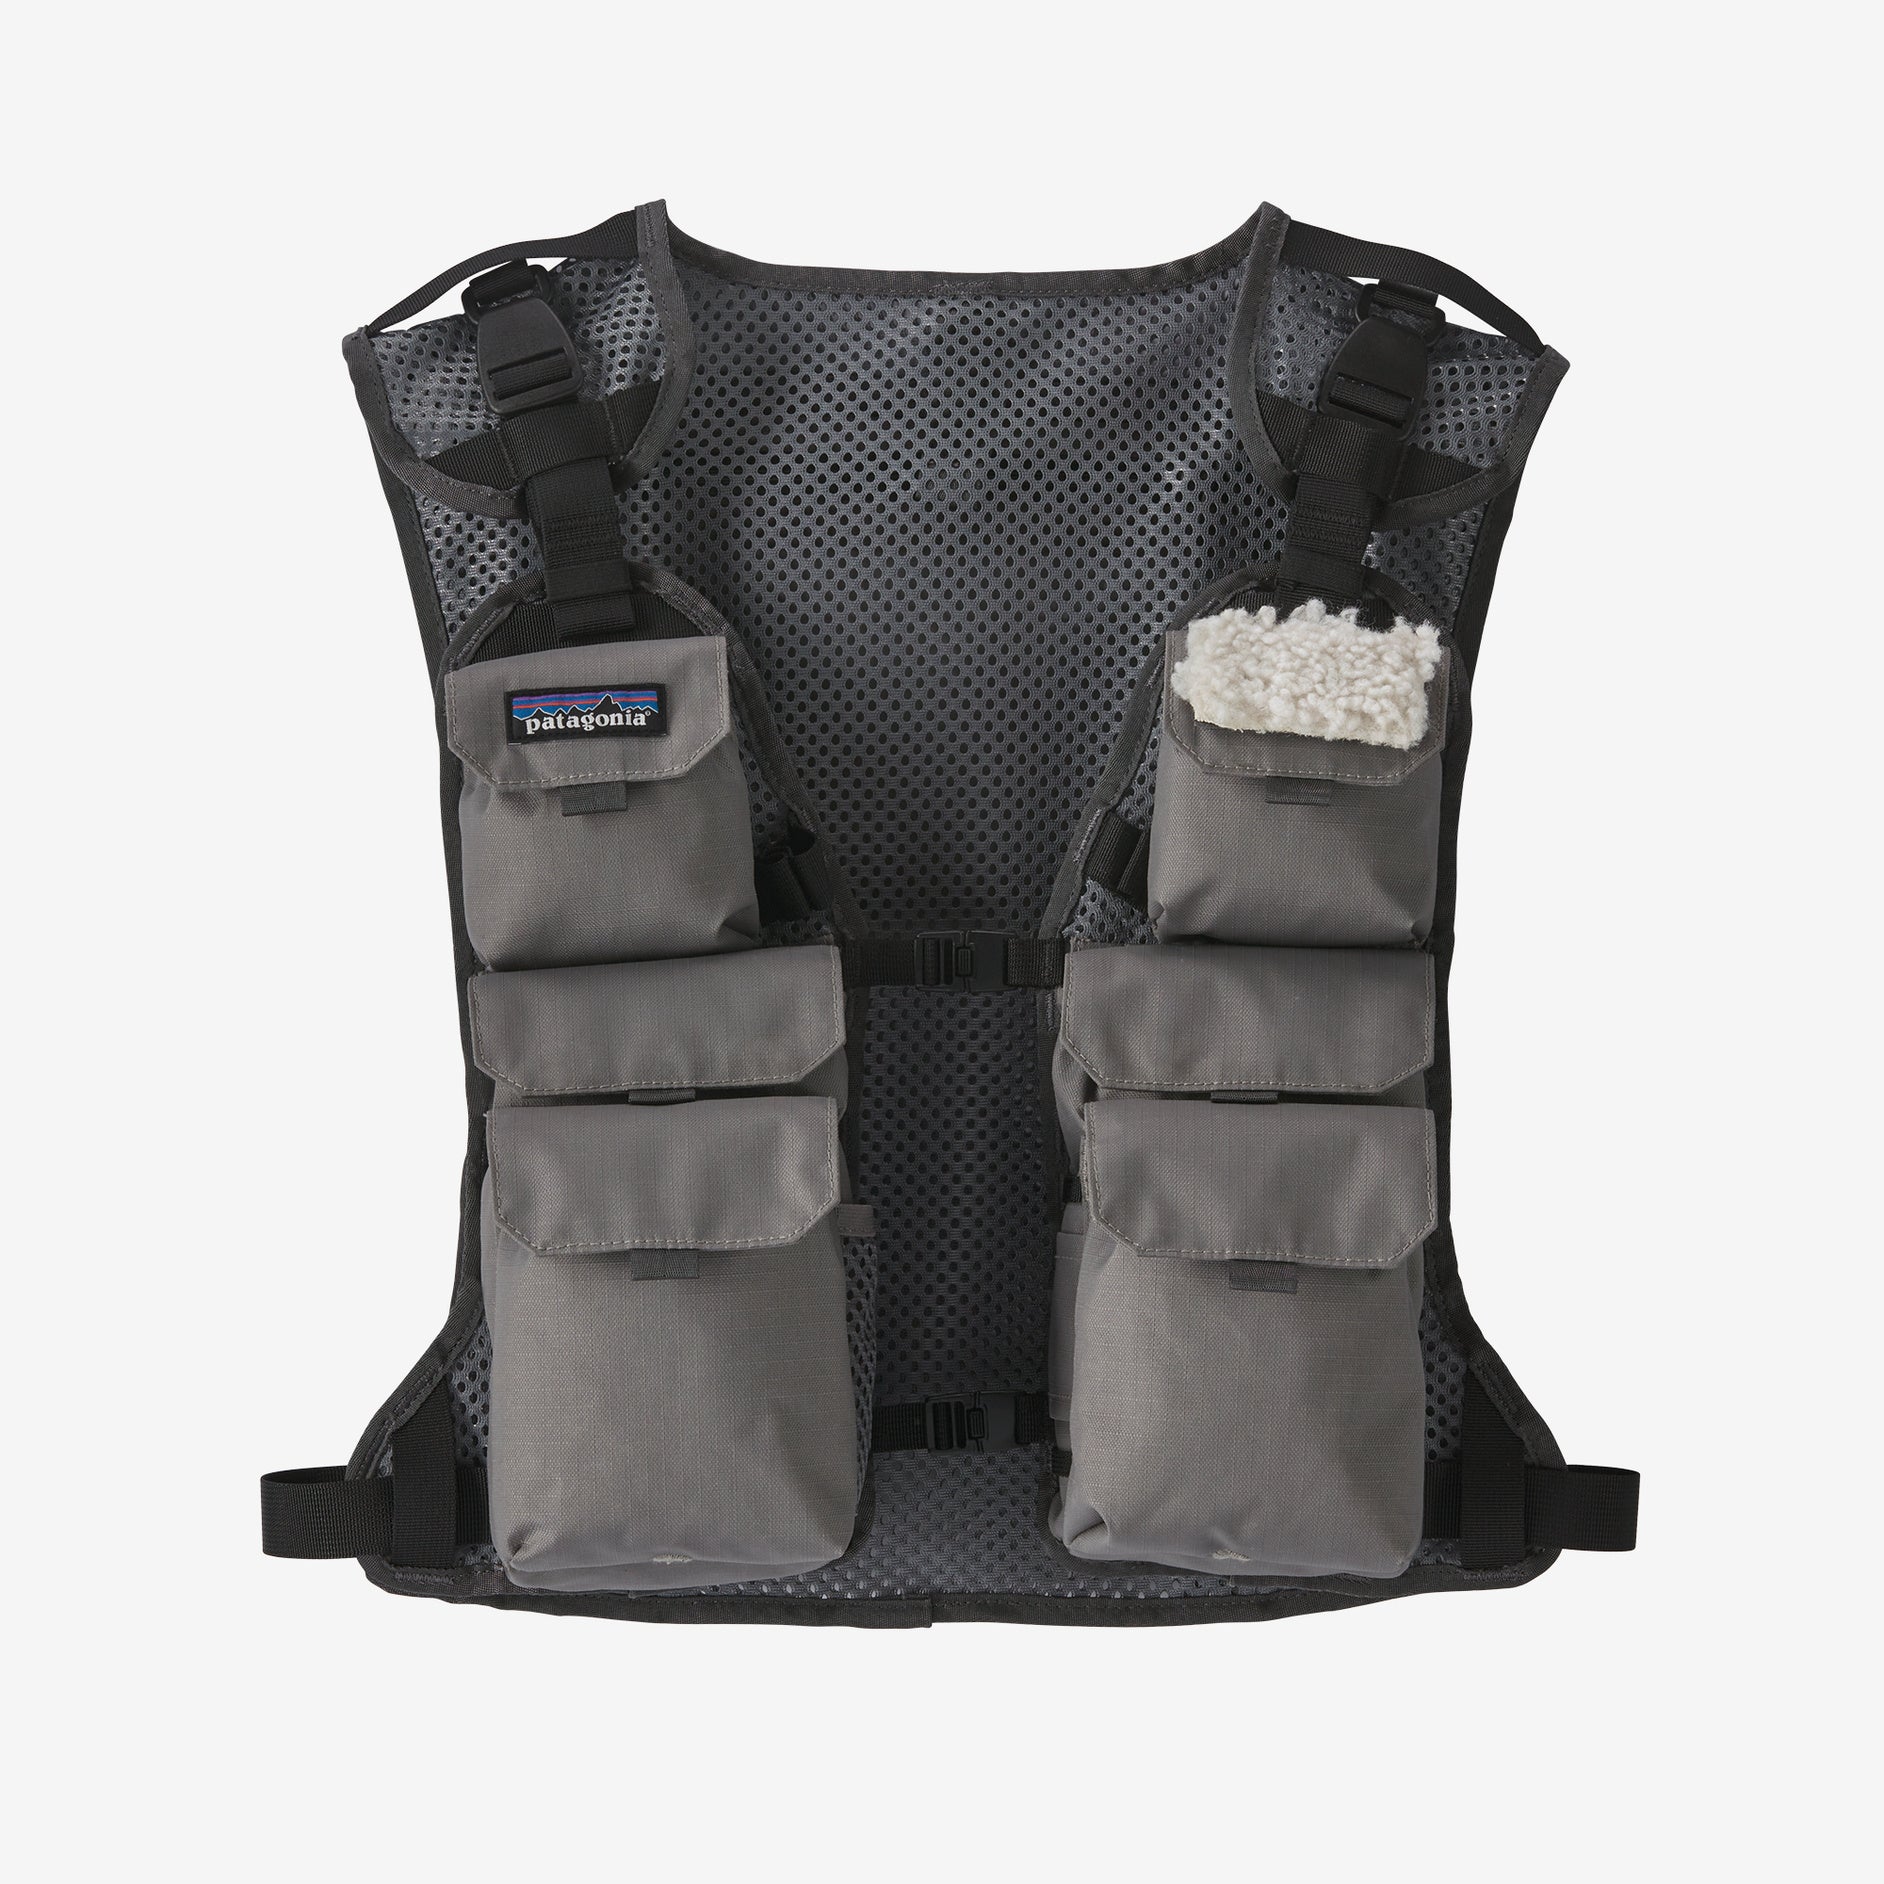 Patagonia Stealth Convertible Fly Vest